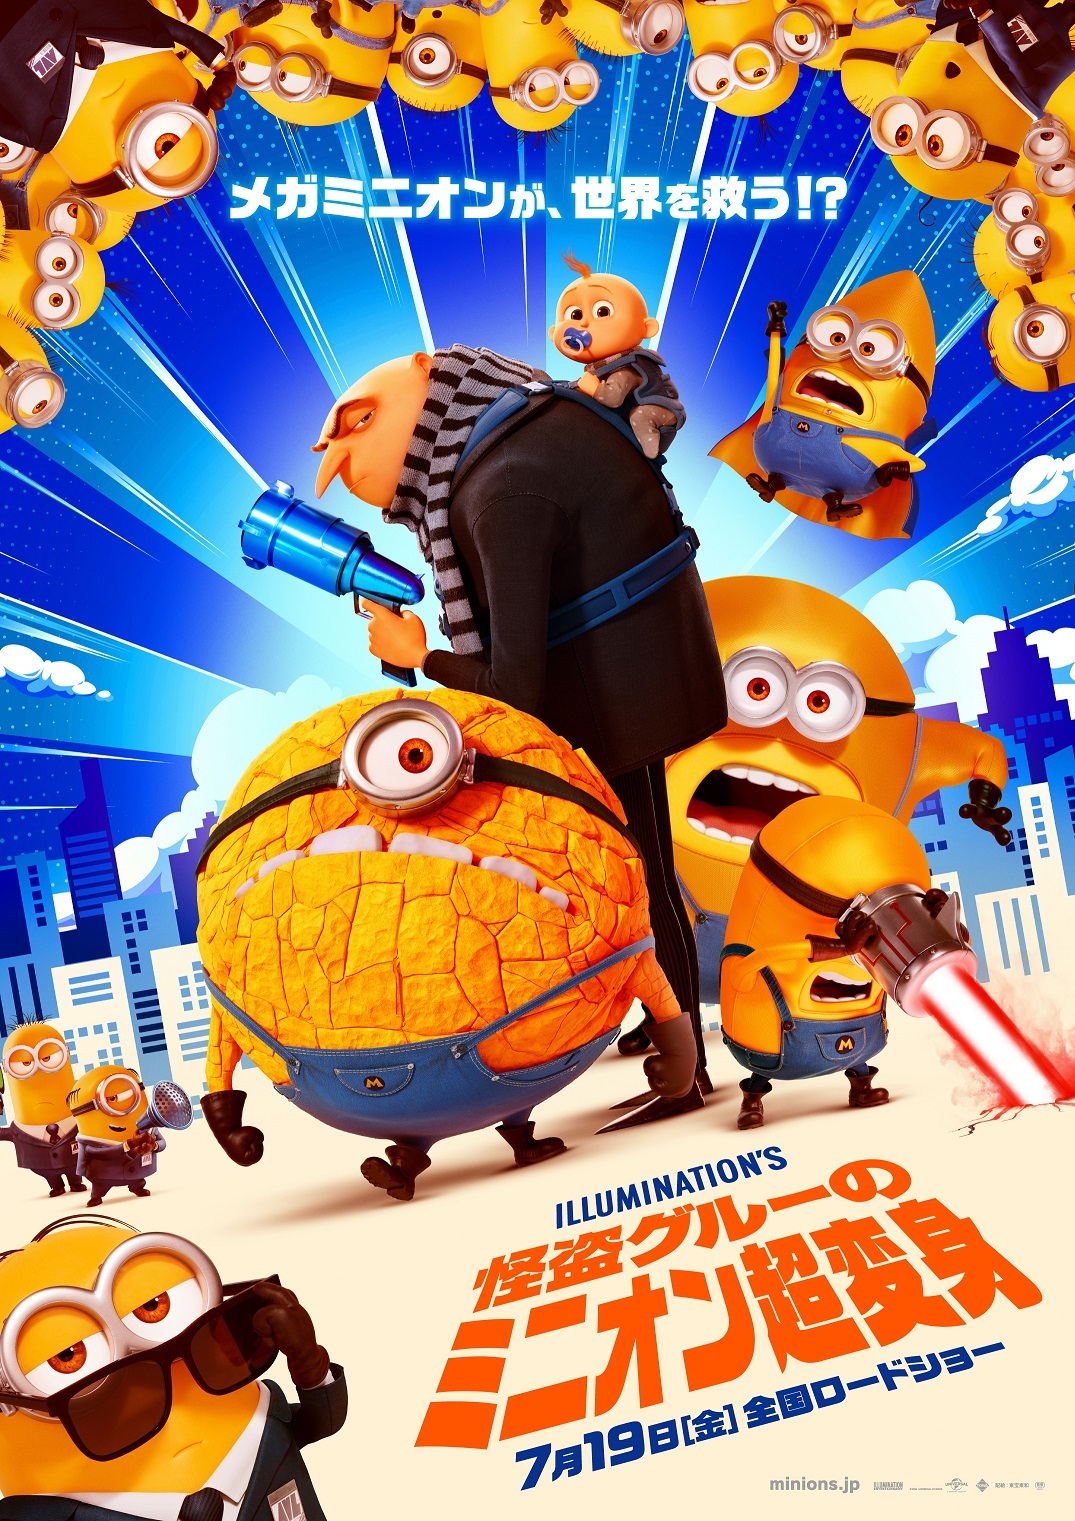 ©Illumination Entertainment and Universal Studios. All Rights Reserved.